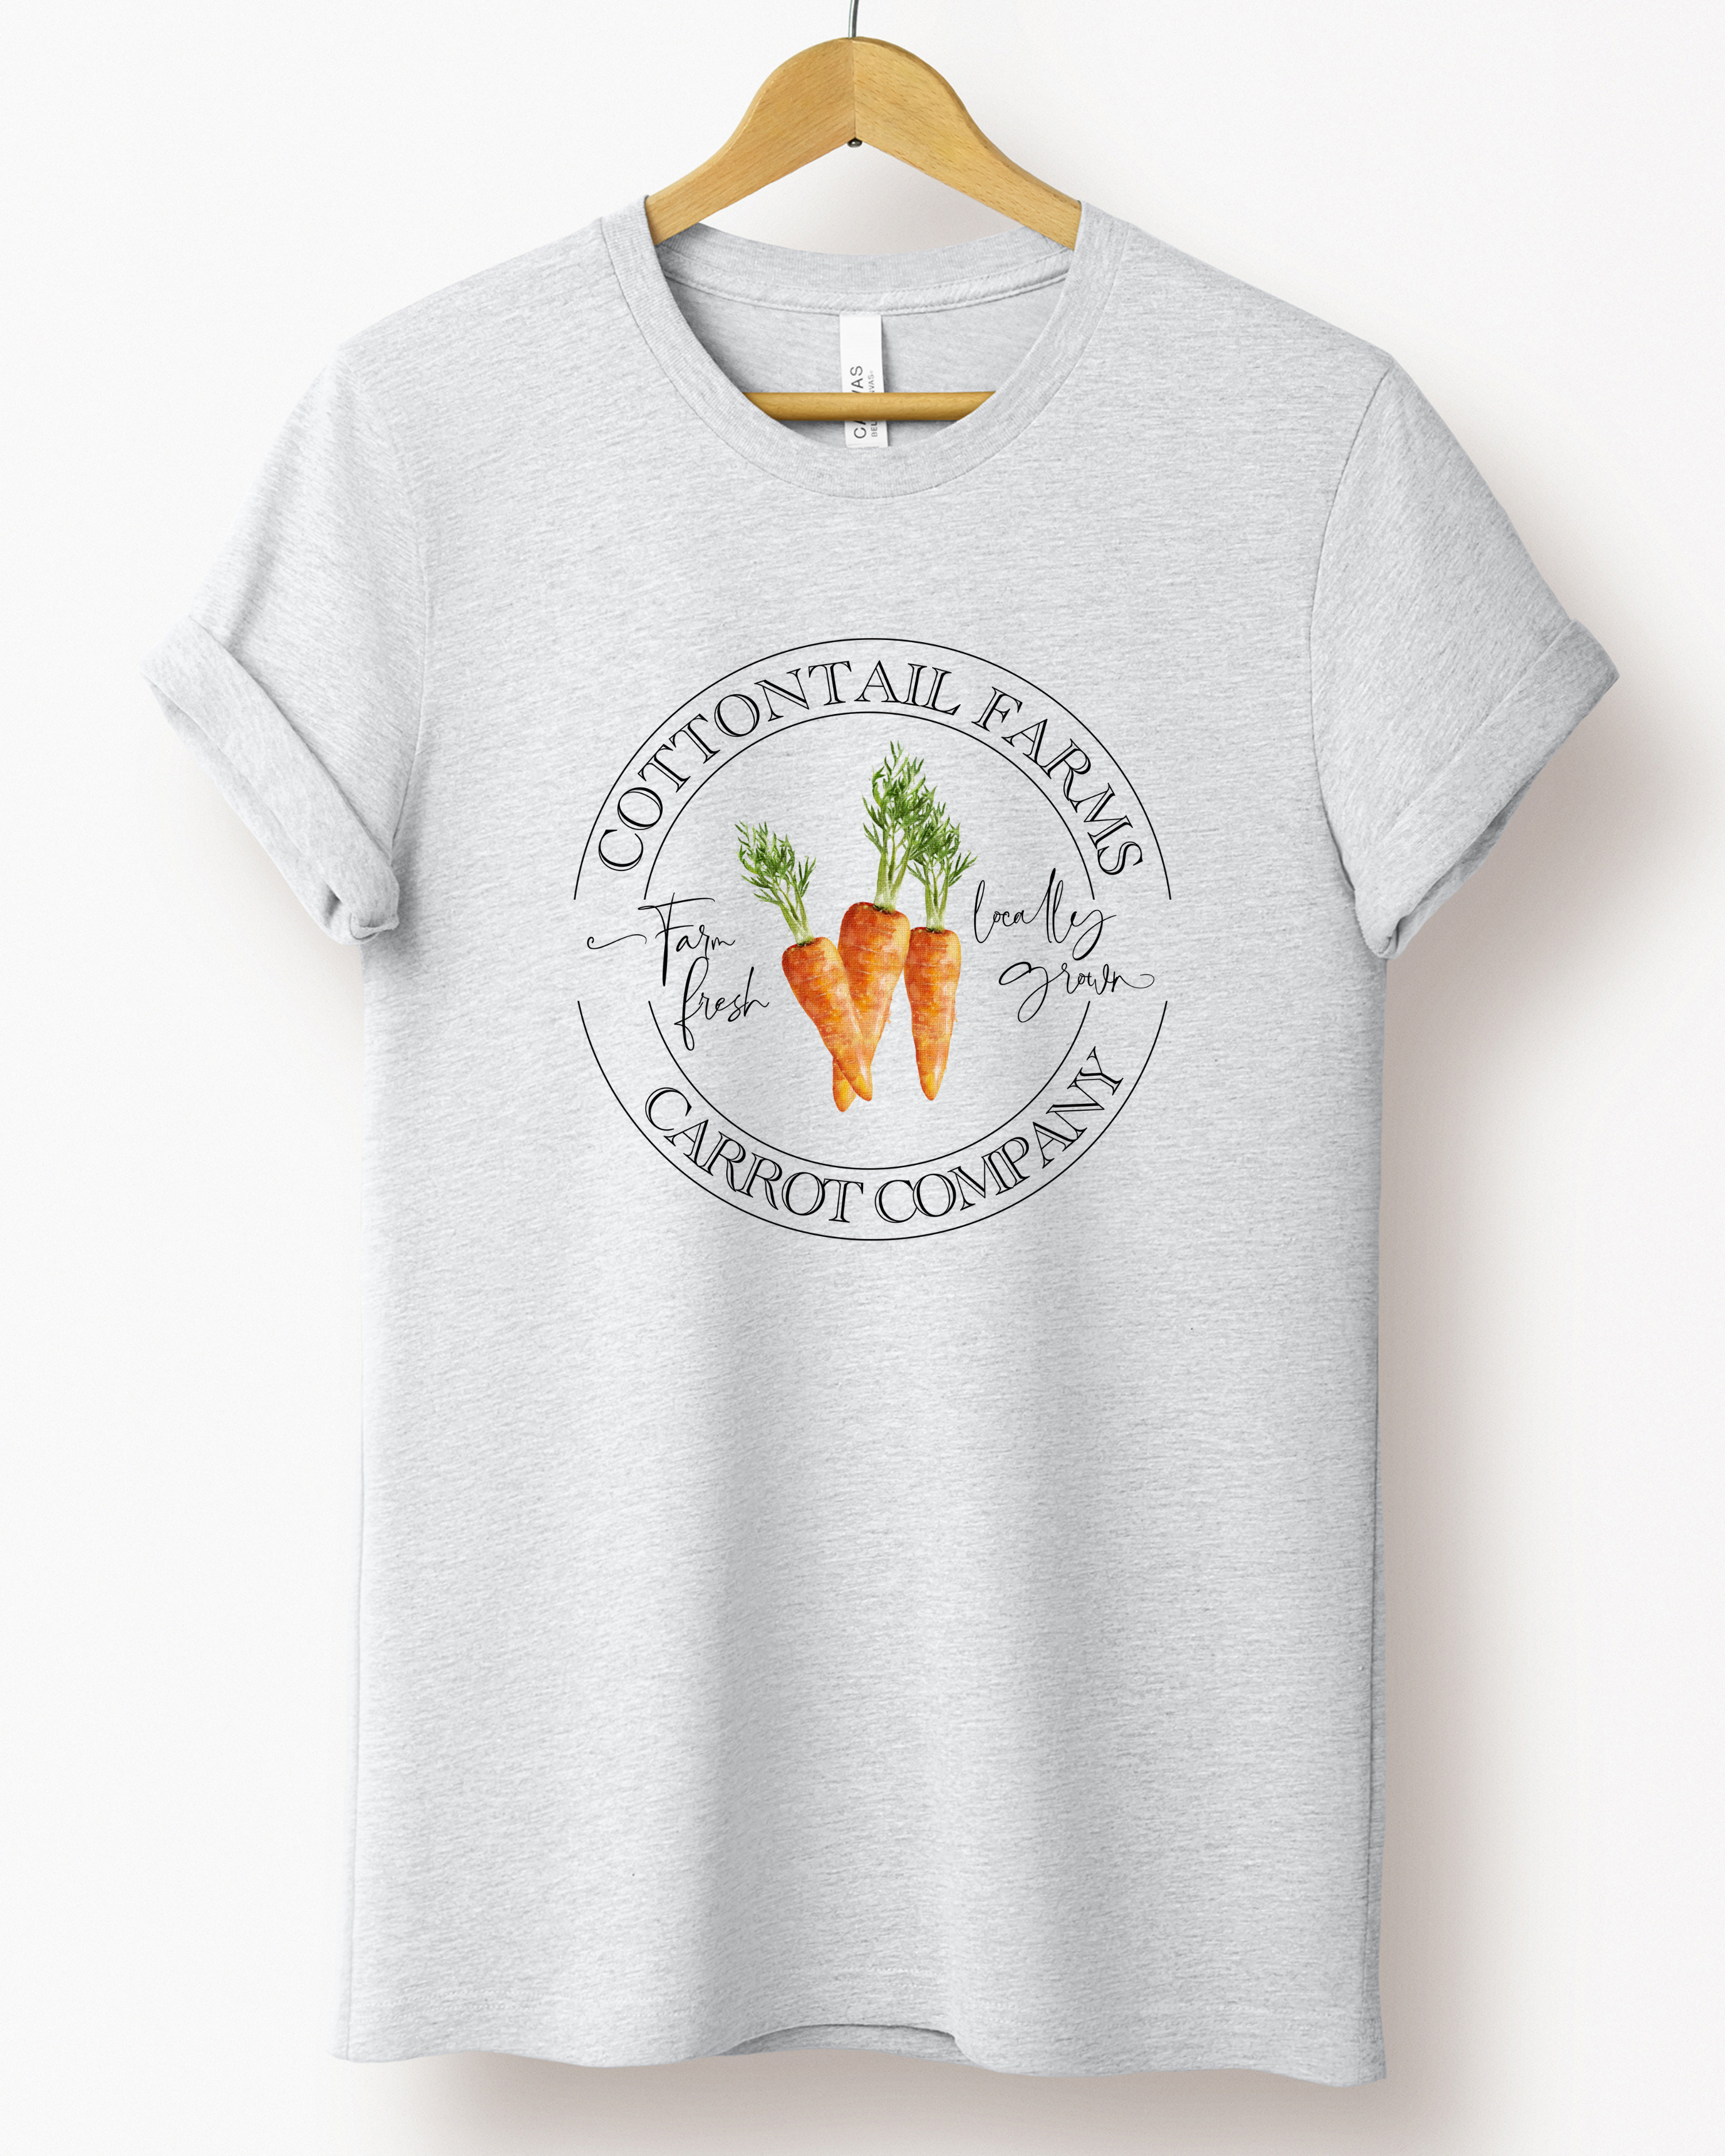 COTTONTAIL FARMS TEE - Mulberry Skies